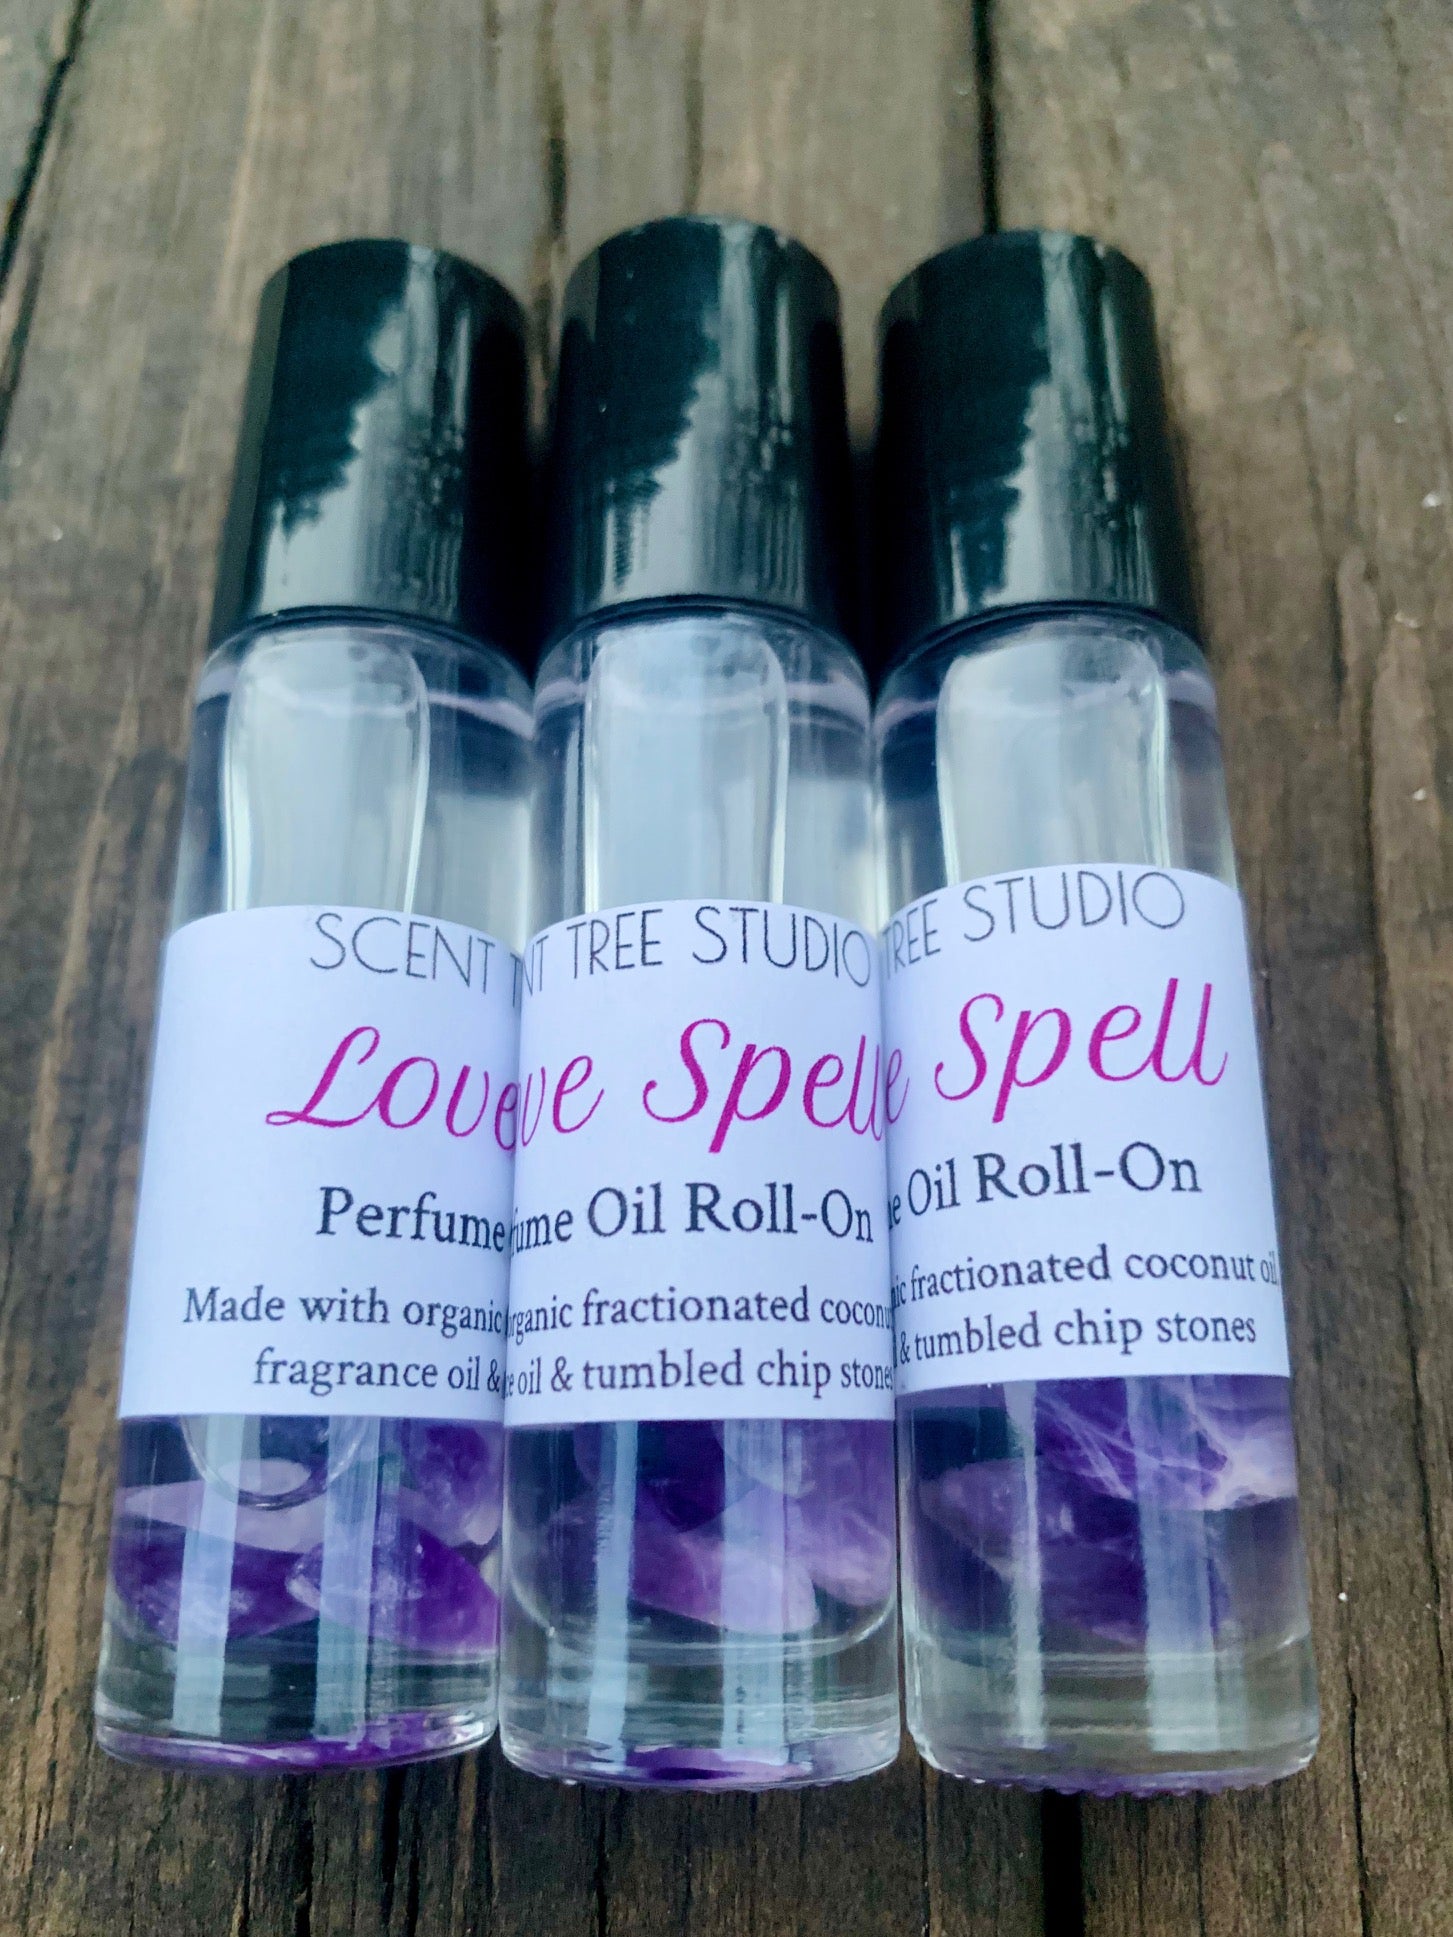 Perfume Oil Roll-Ons